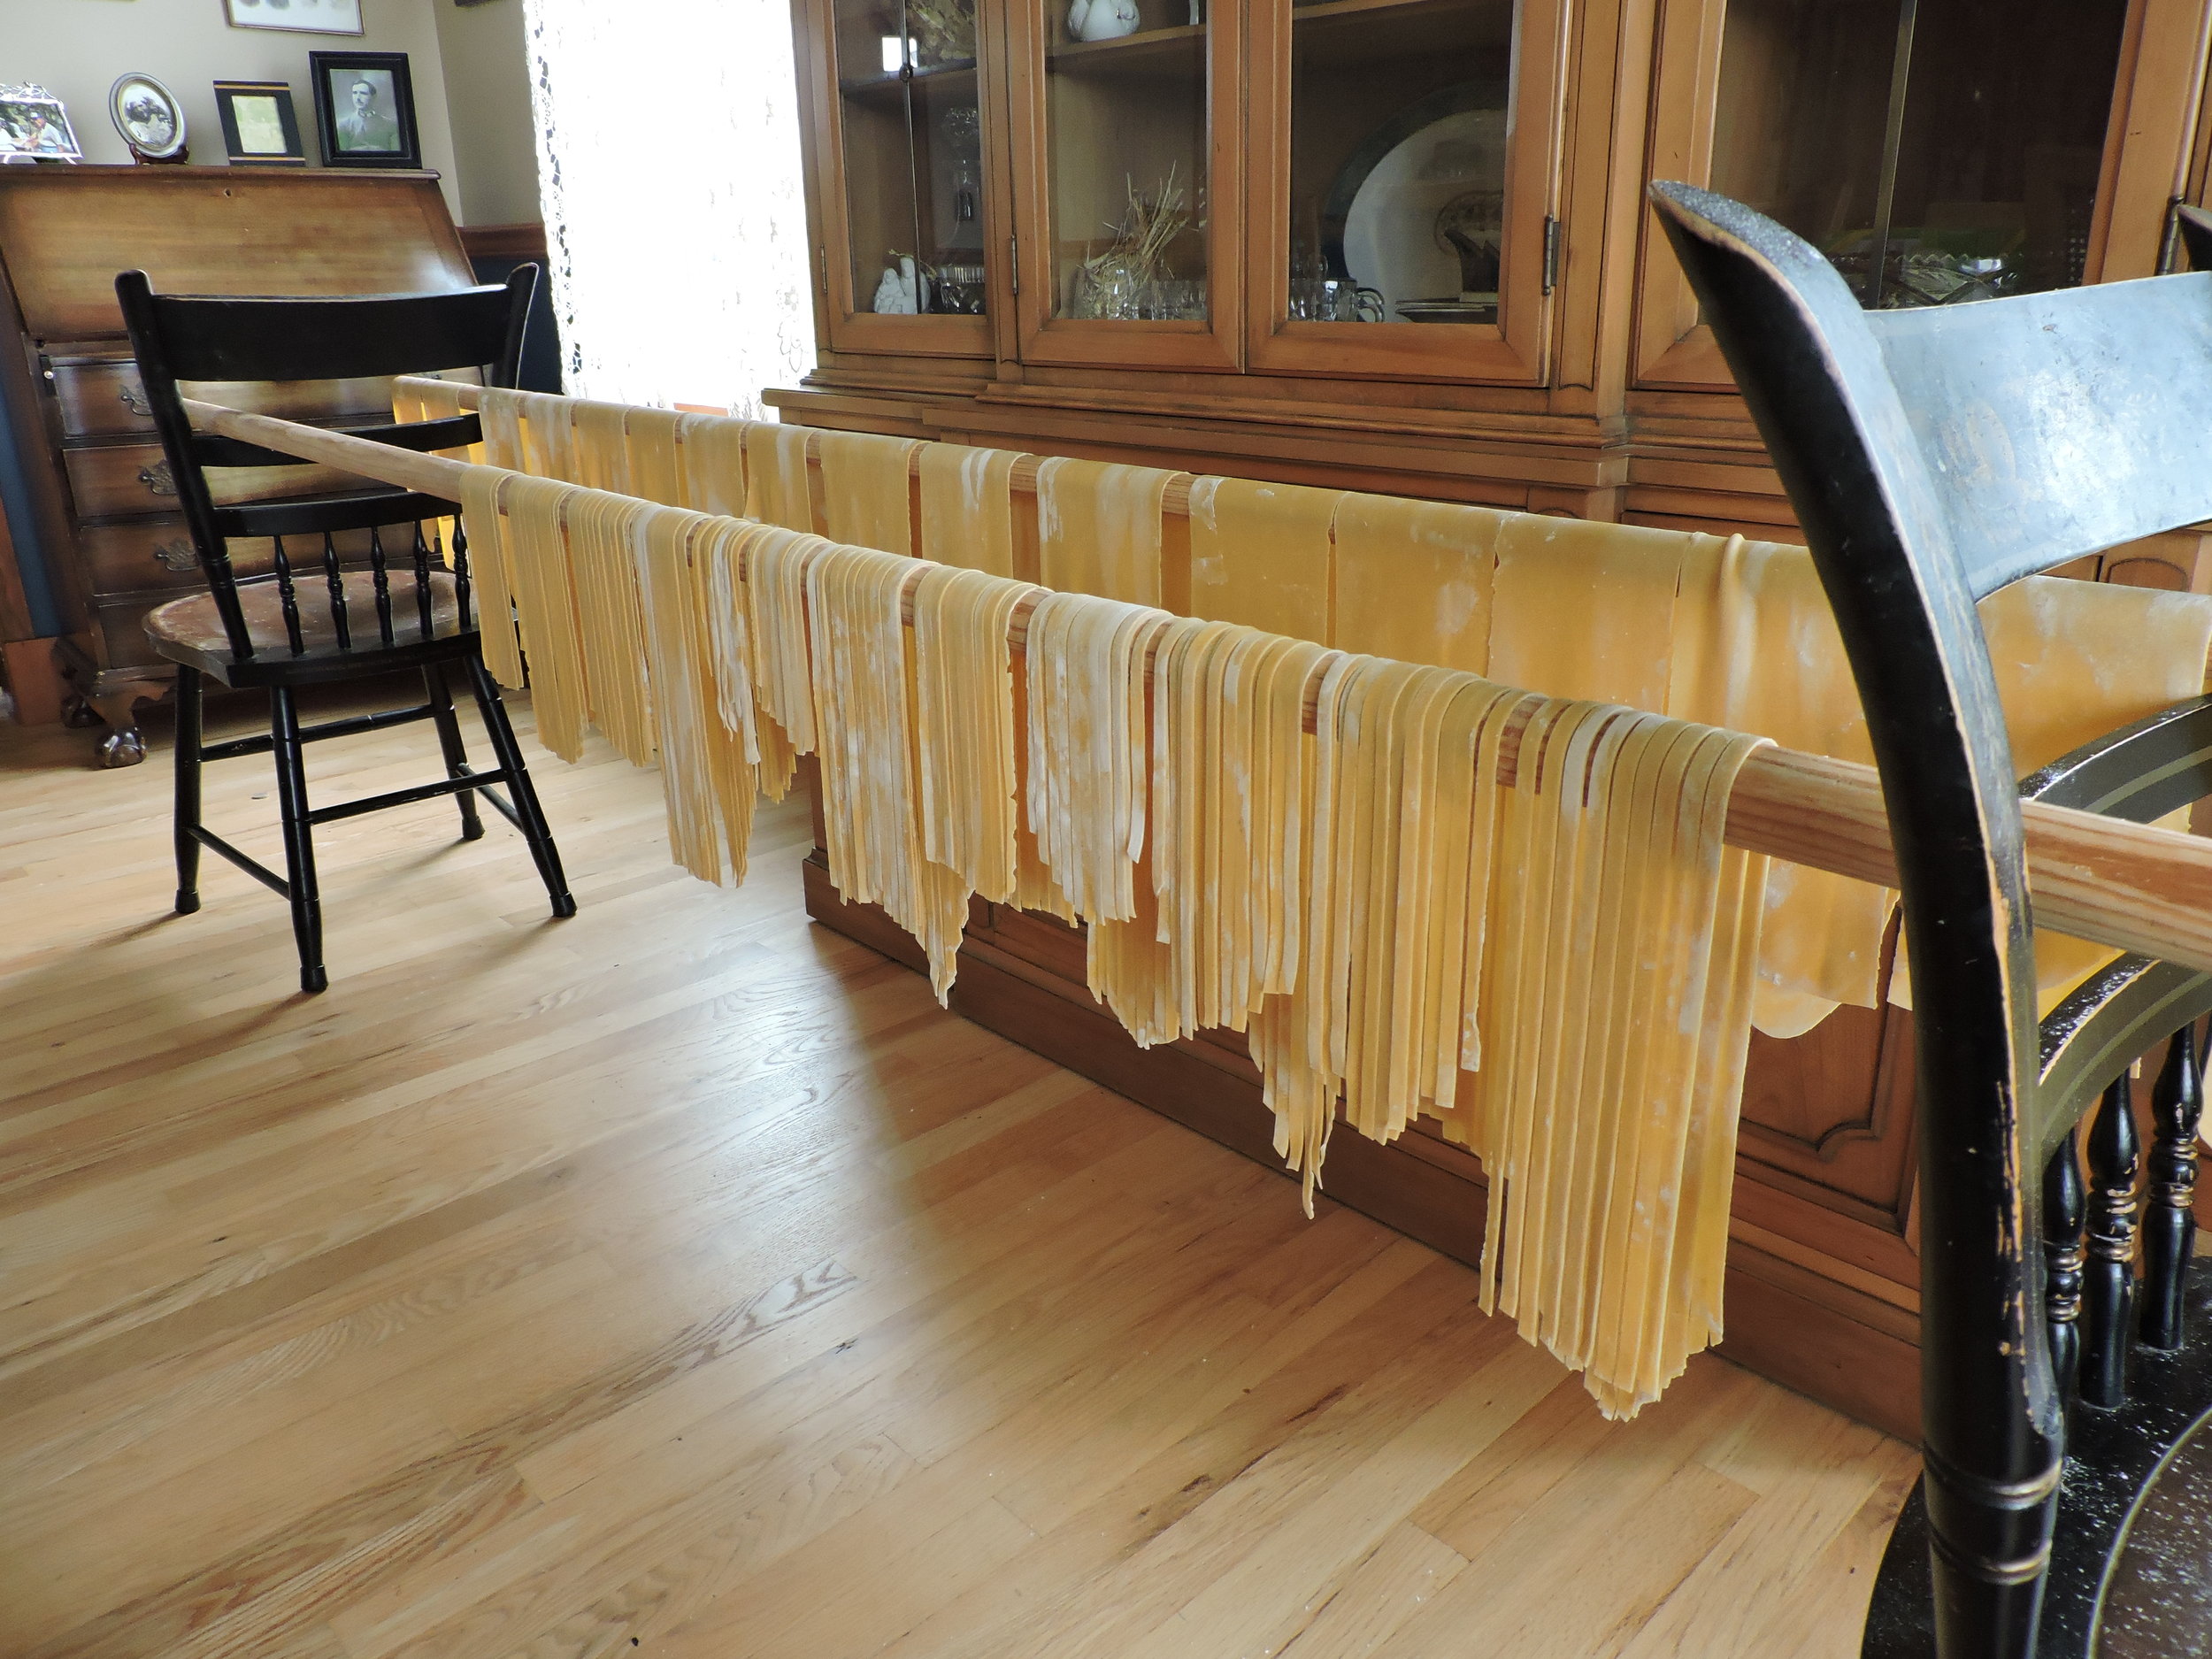  Both cut strands and pasta sheets drying midway through cutting pasta. I'm doing three batches here as I was making two for the family and one as a postpartum meal for a friend. 